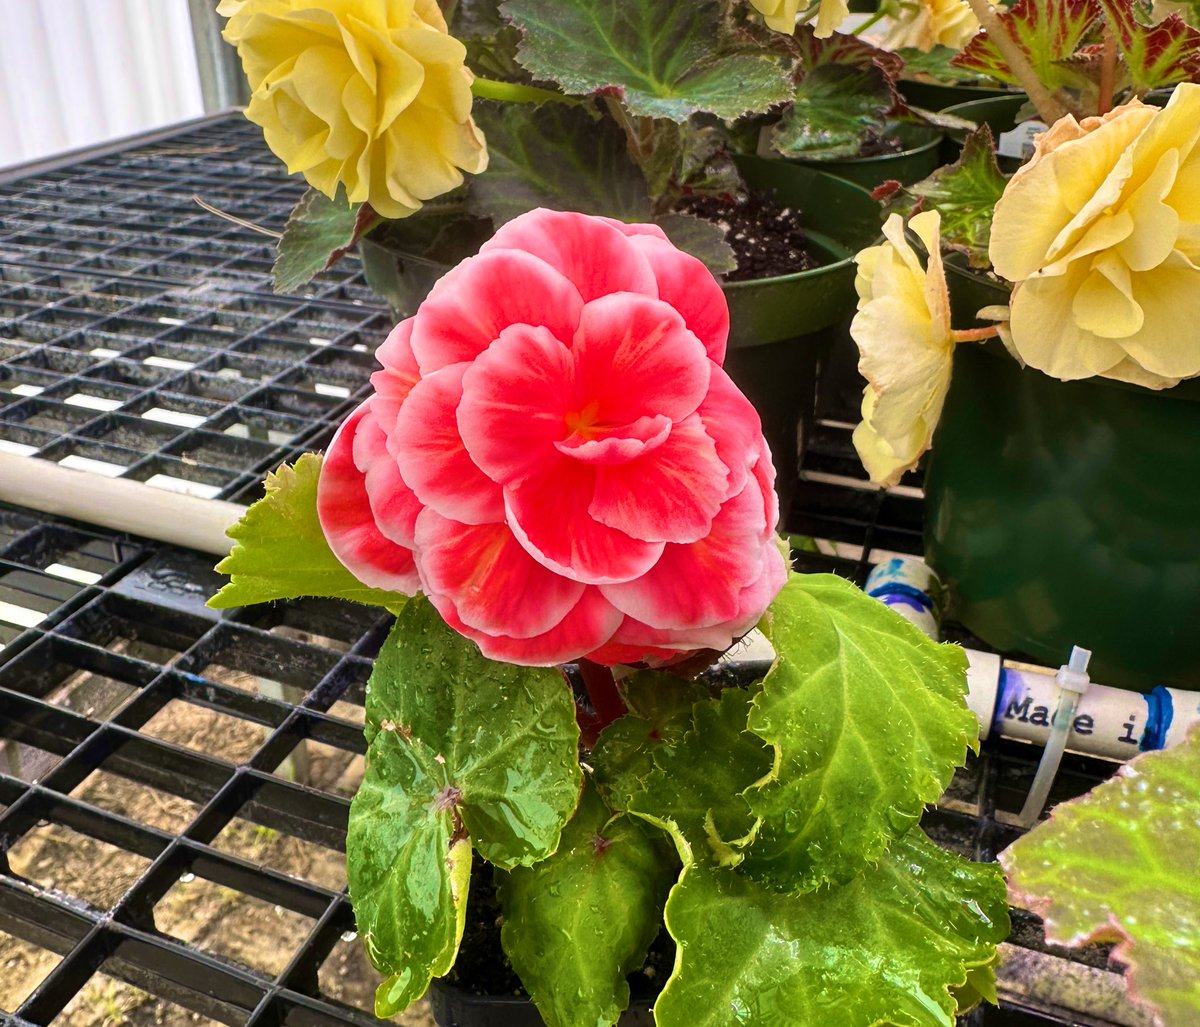 The last of our begonia blooms opened, and i think it’s safe to say it may be our favorite to date.